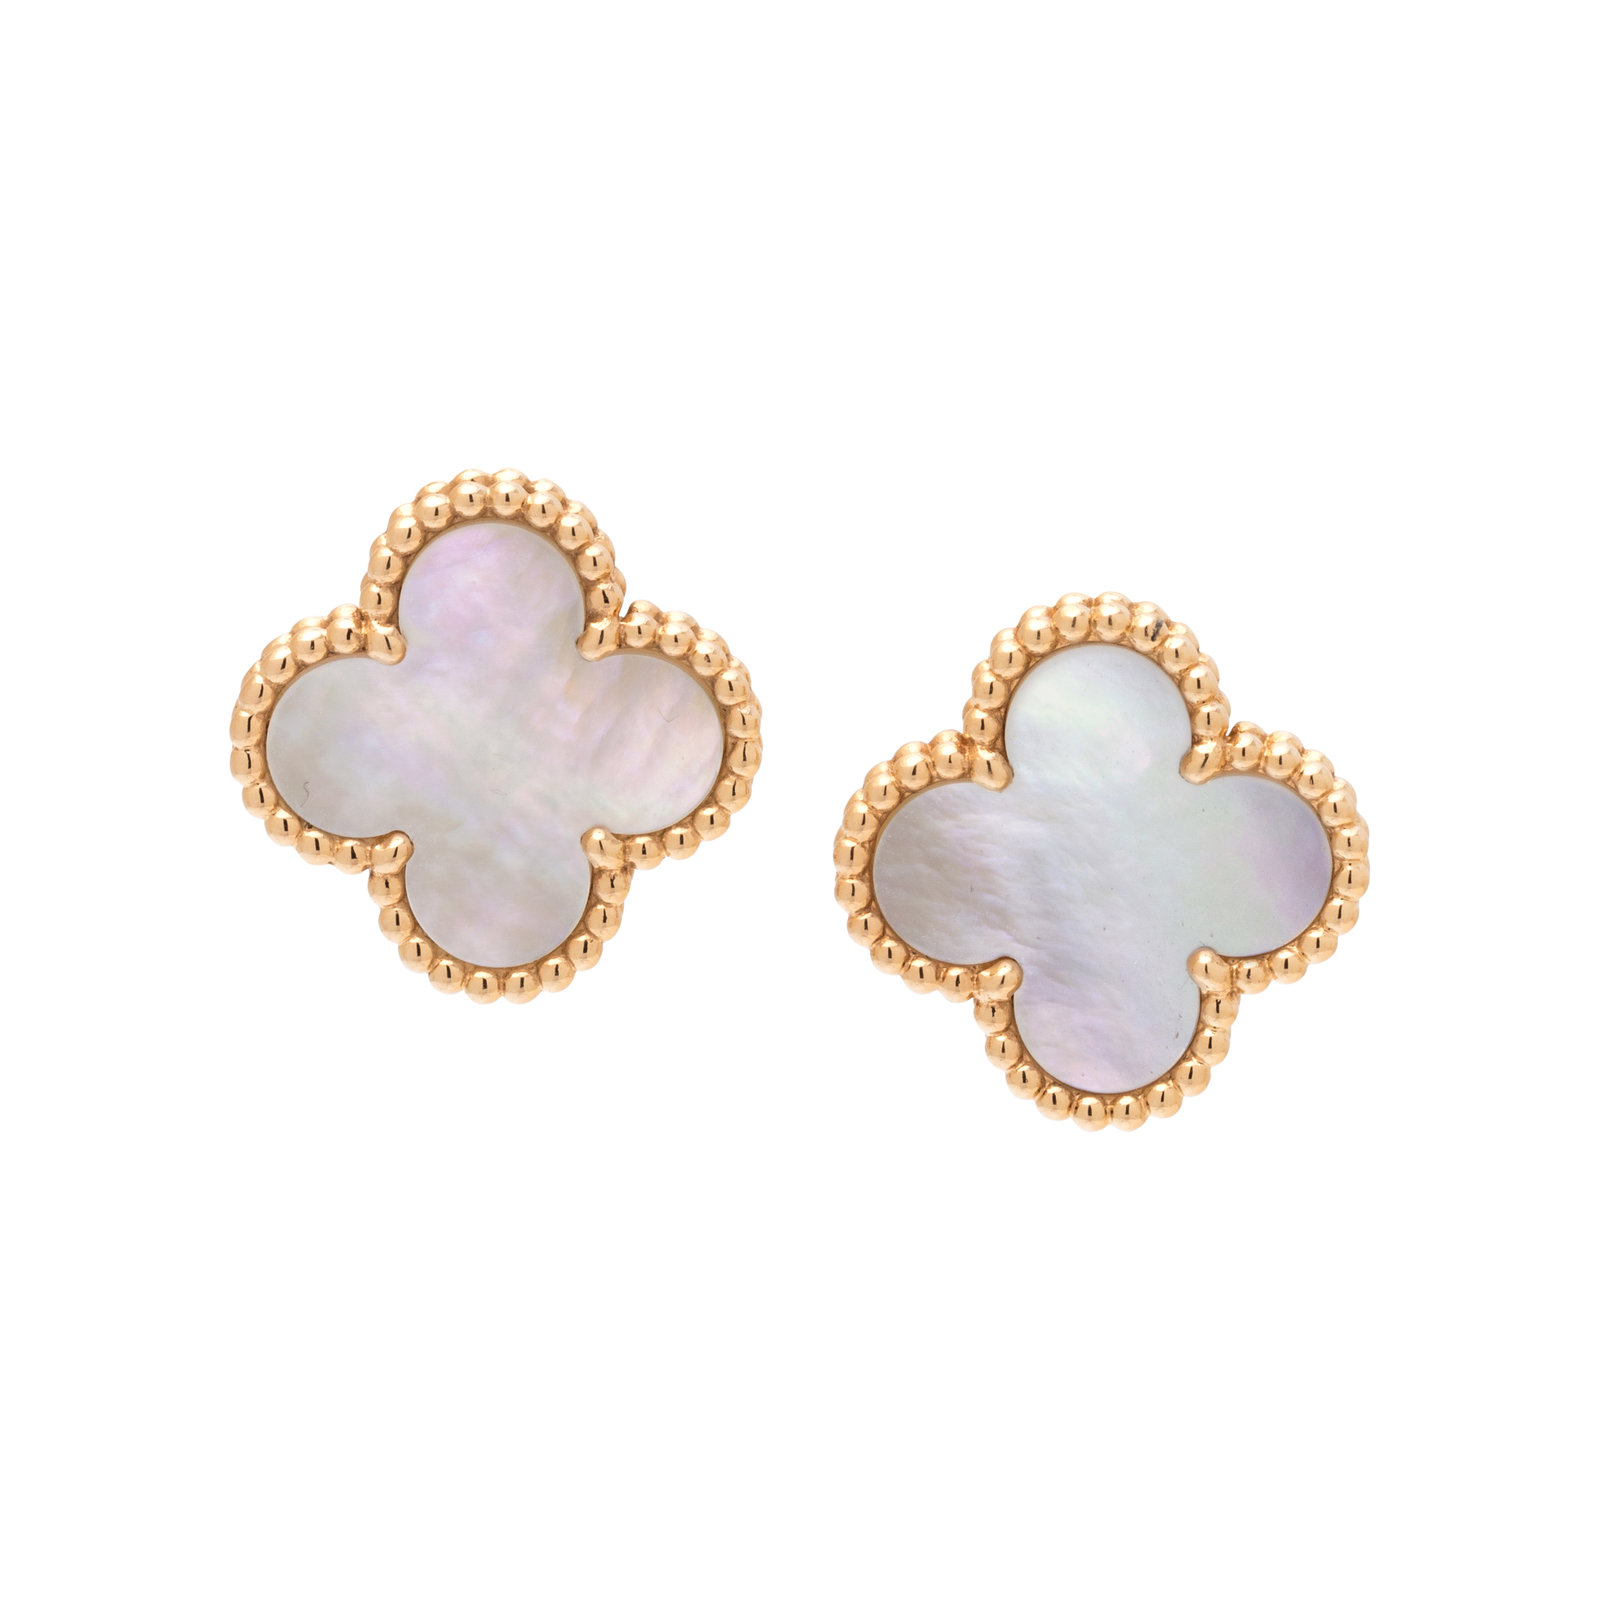 Sold at Auction: Van Cleef & Arpels Magic Alhambra Earrings